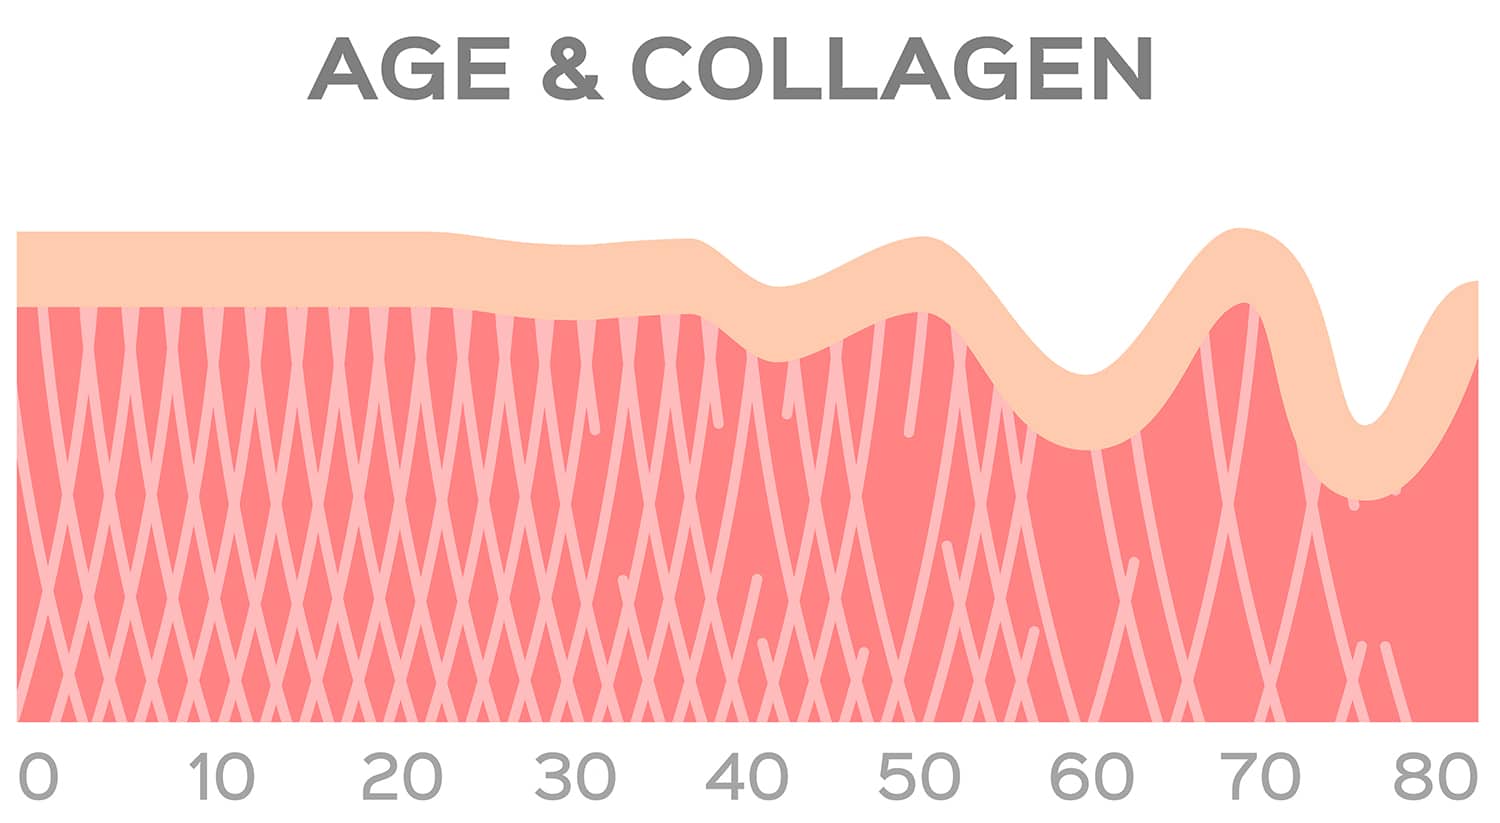 age-and-collagen-chart